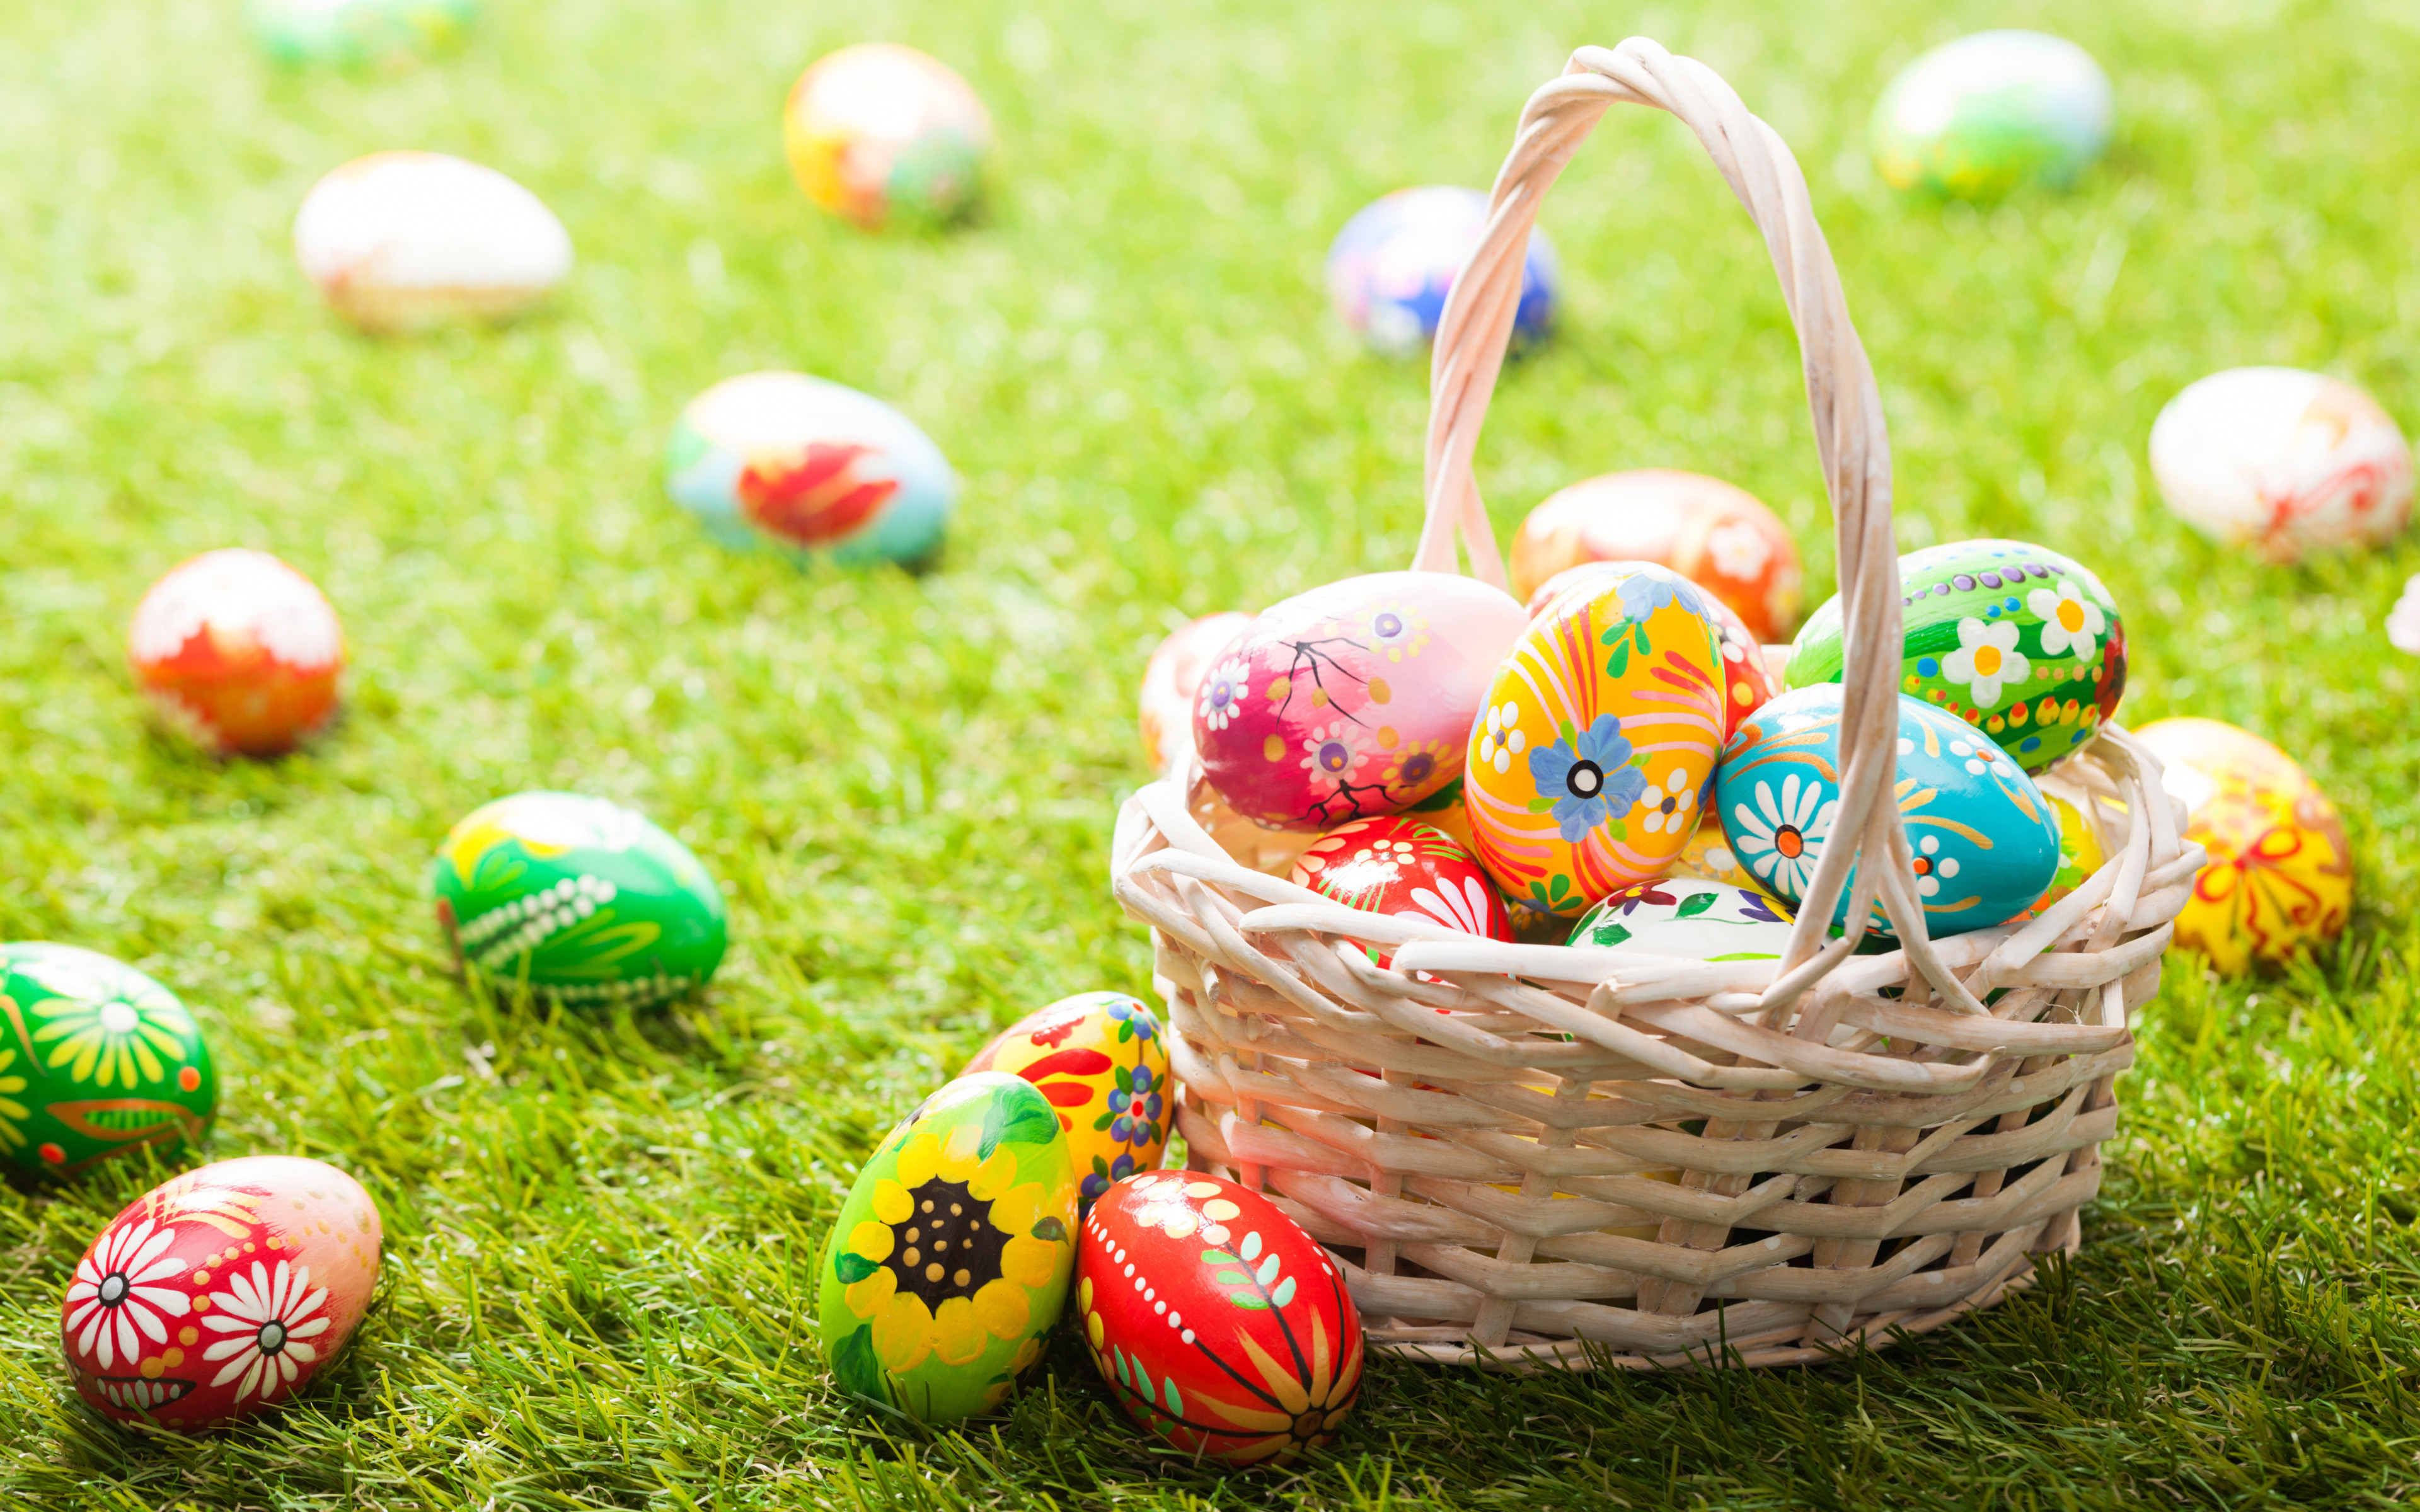 Download wallpaper 4k, Easter, basket, spring, Easter eggs, Easter decoration, green grass for desktop with resolution 3840x2400. High Quality HD picture wallpaper